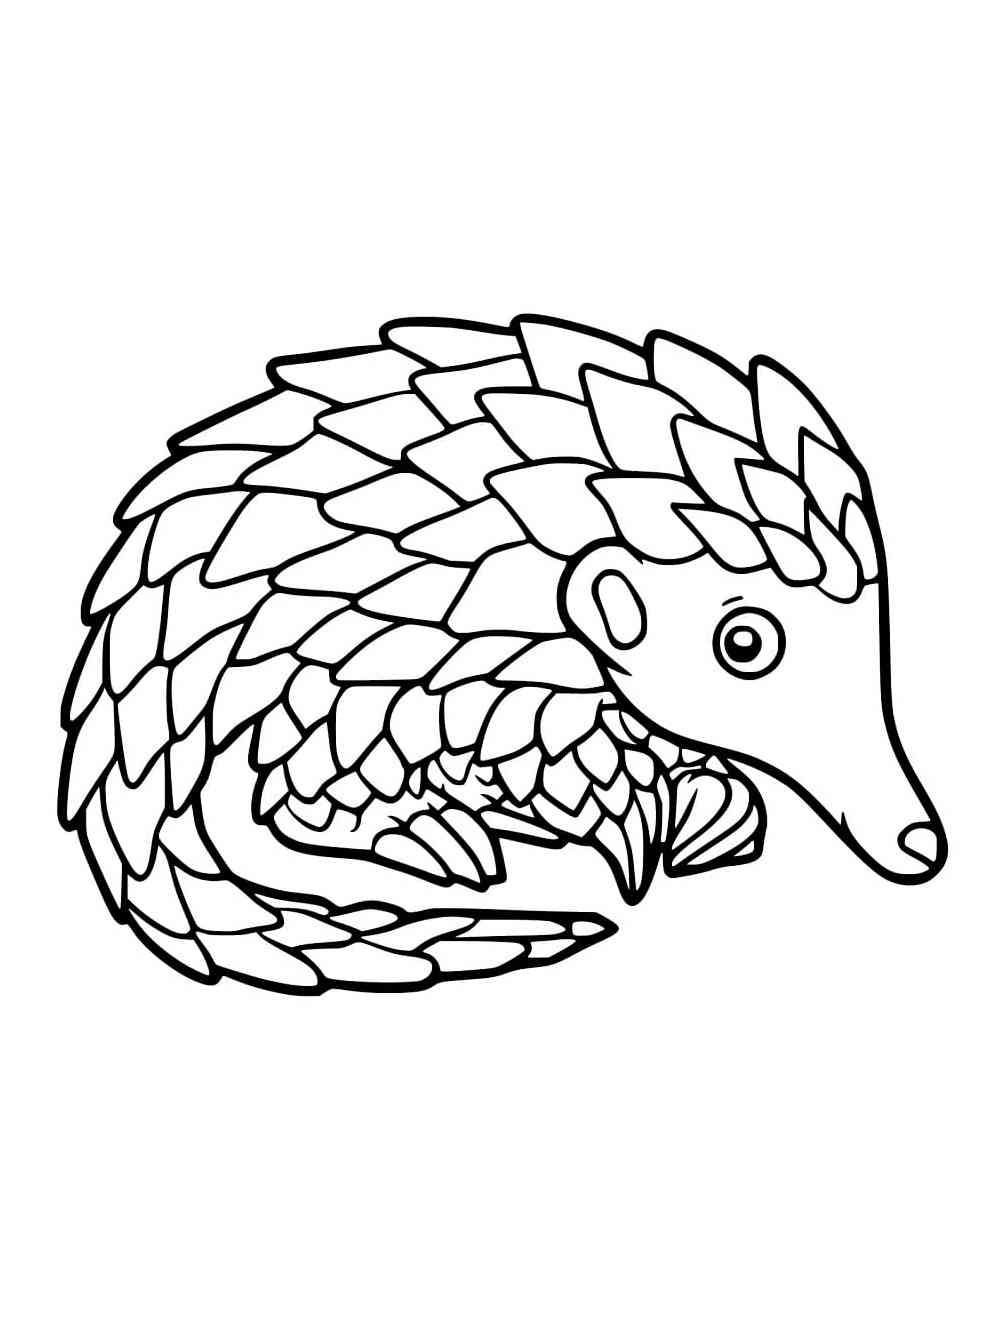 Little Pangolin coloring page